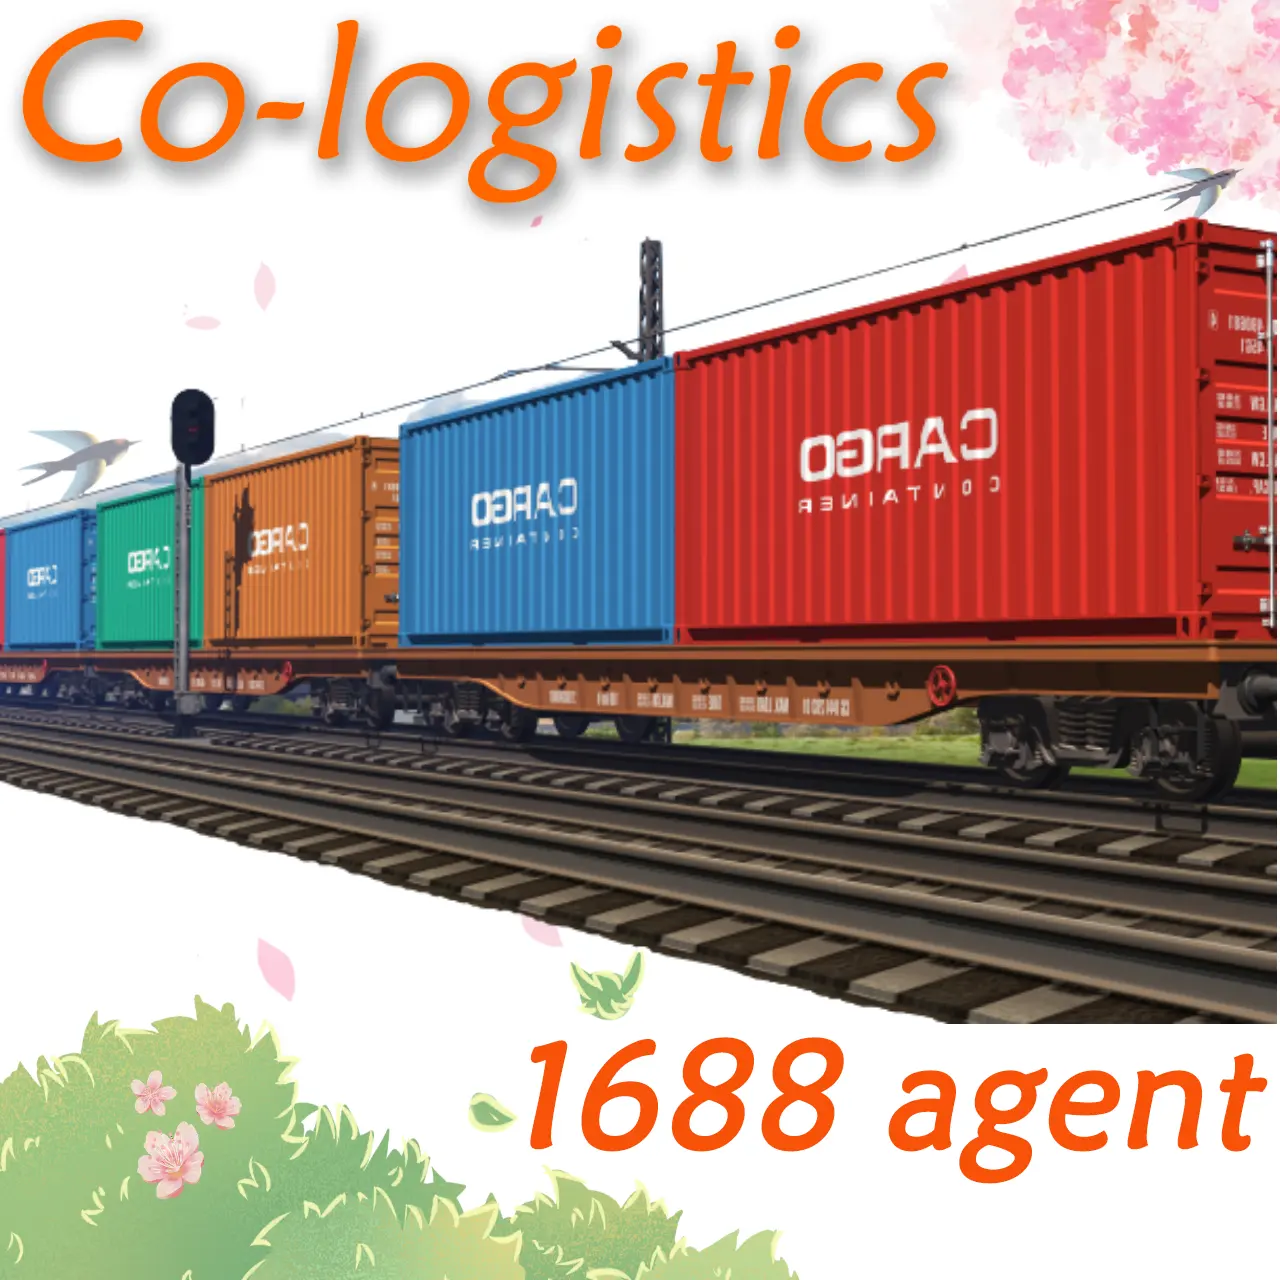 Shipping Forwarder Top 3 Freight Forwarders Railway Cargo Cheap Cost China Train Shipping To Italy Europe FLY Storage Logistics Container Origin